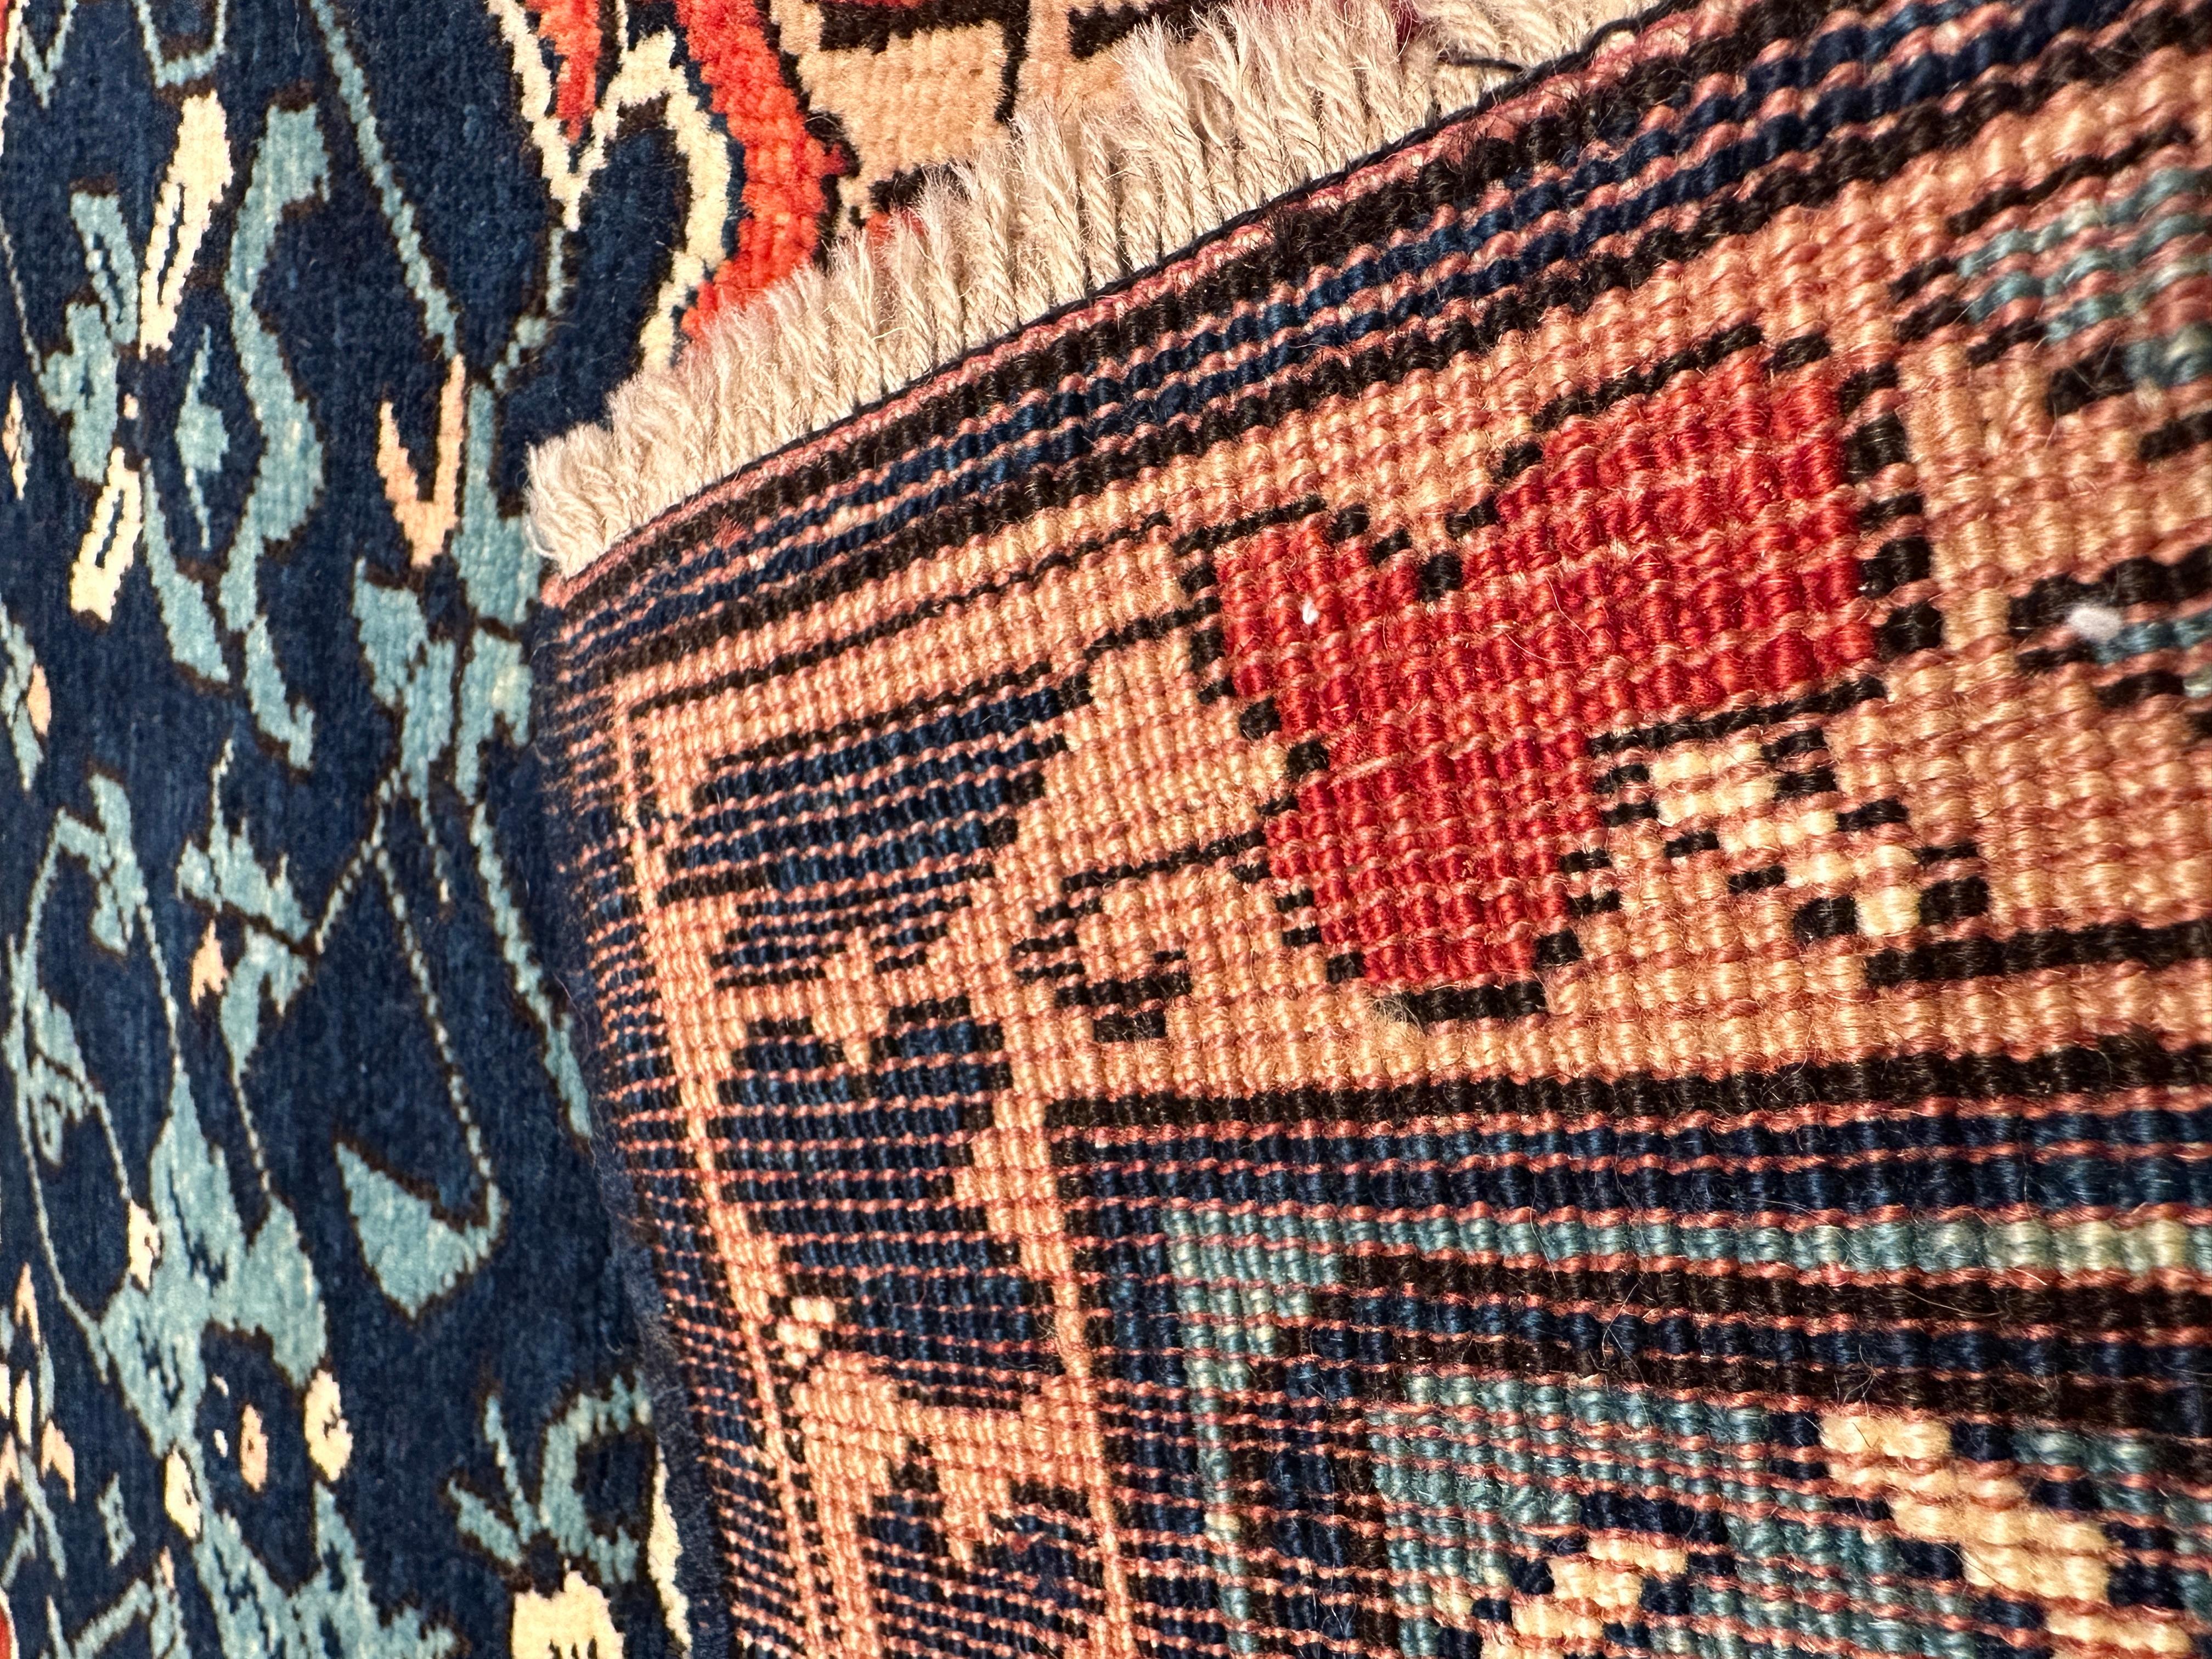 The source of the carpet comes from the book How to Read – Islamic carpets, Walter B. Denny, The Metropolitan Museum of Art, New York 2014 fig.46-47 and Oriental Rugs, Volume 4 Turkish, Kurt Zipper and Claudia Fritzsche, Antique Collectors’ Club,